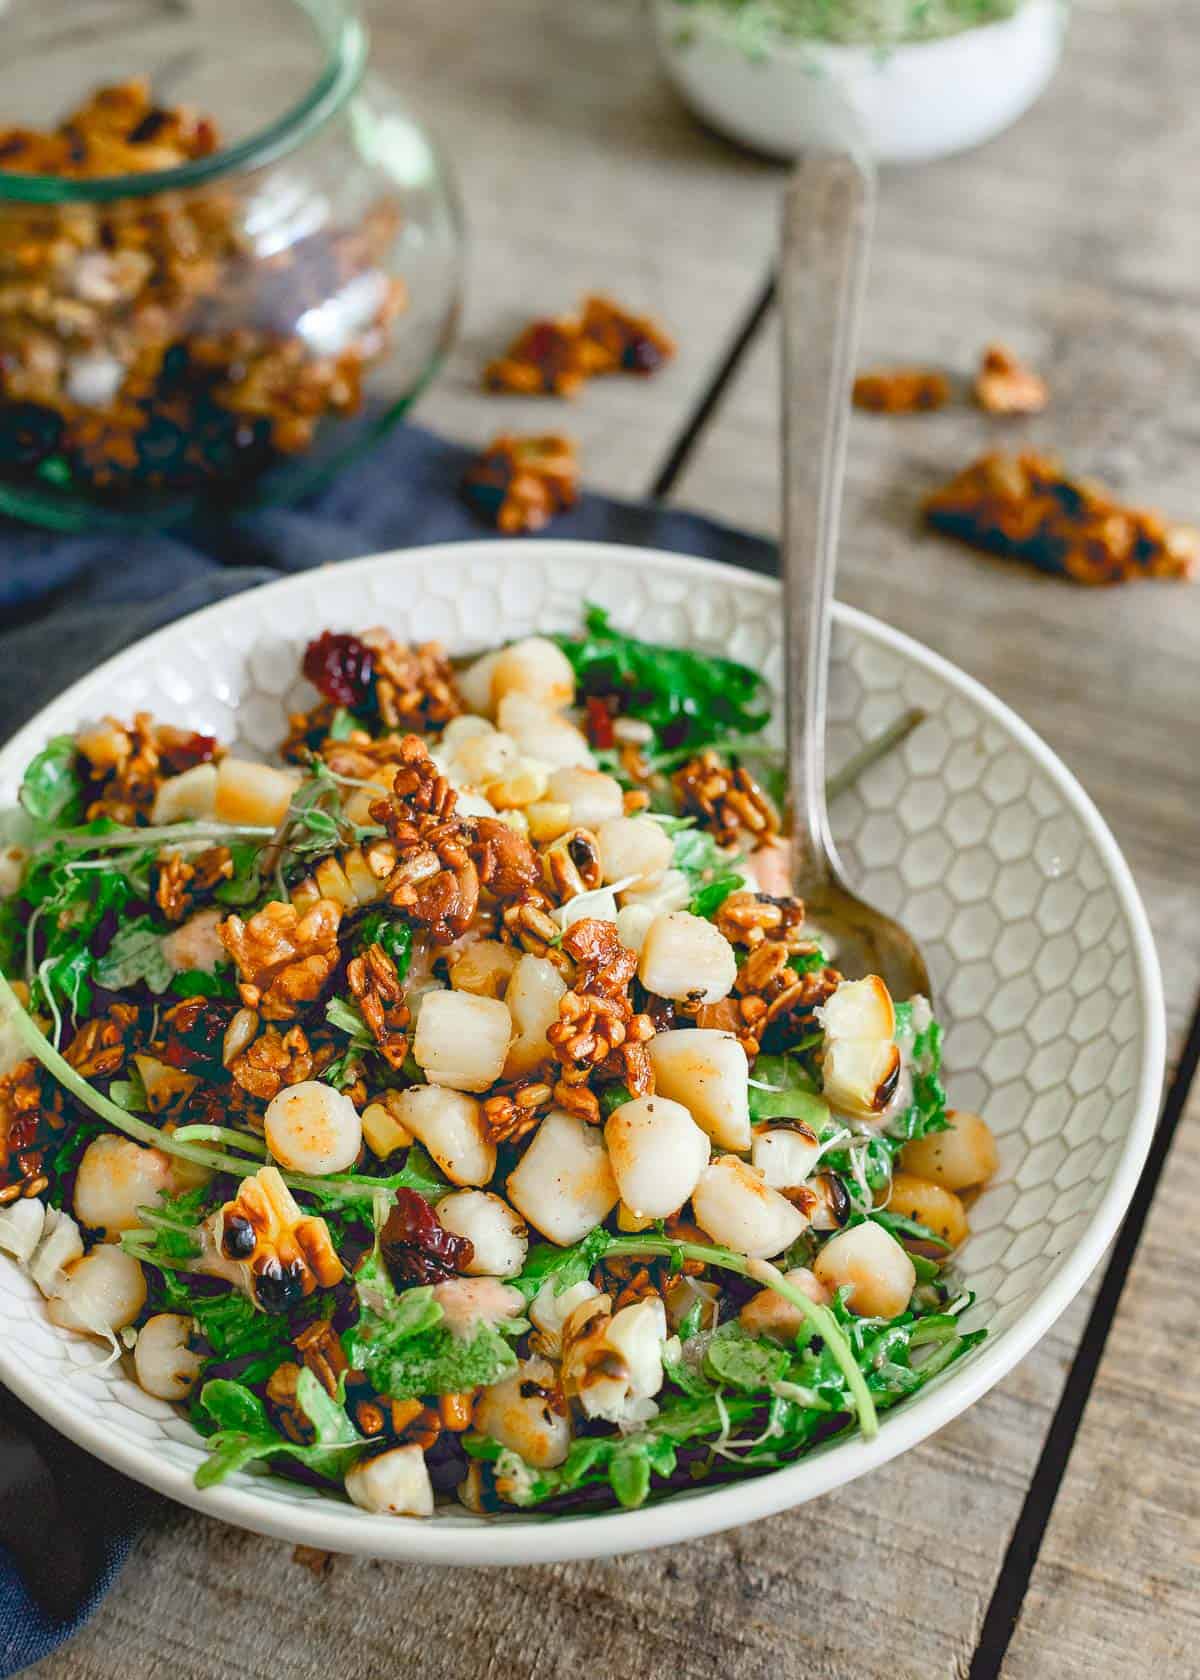 Make healthy eating in the summer delicious and fun with this bay scallop baby kale corn salad with savory tart cherry granola.